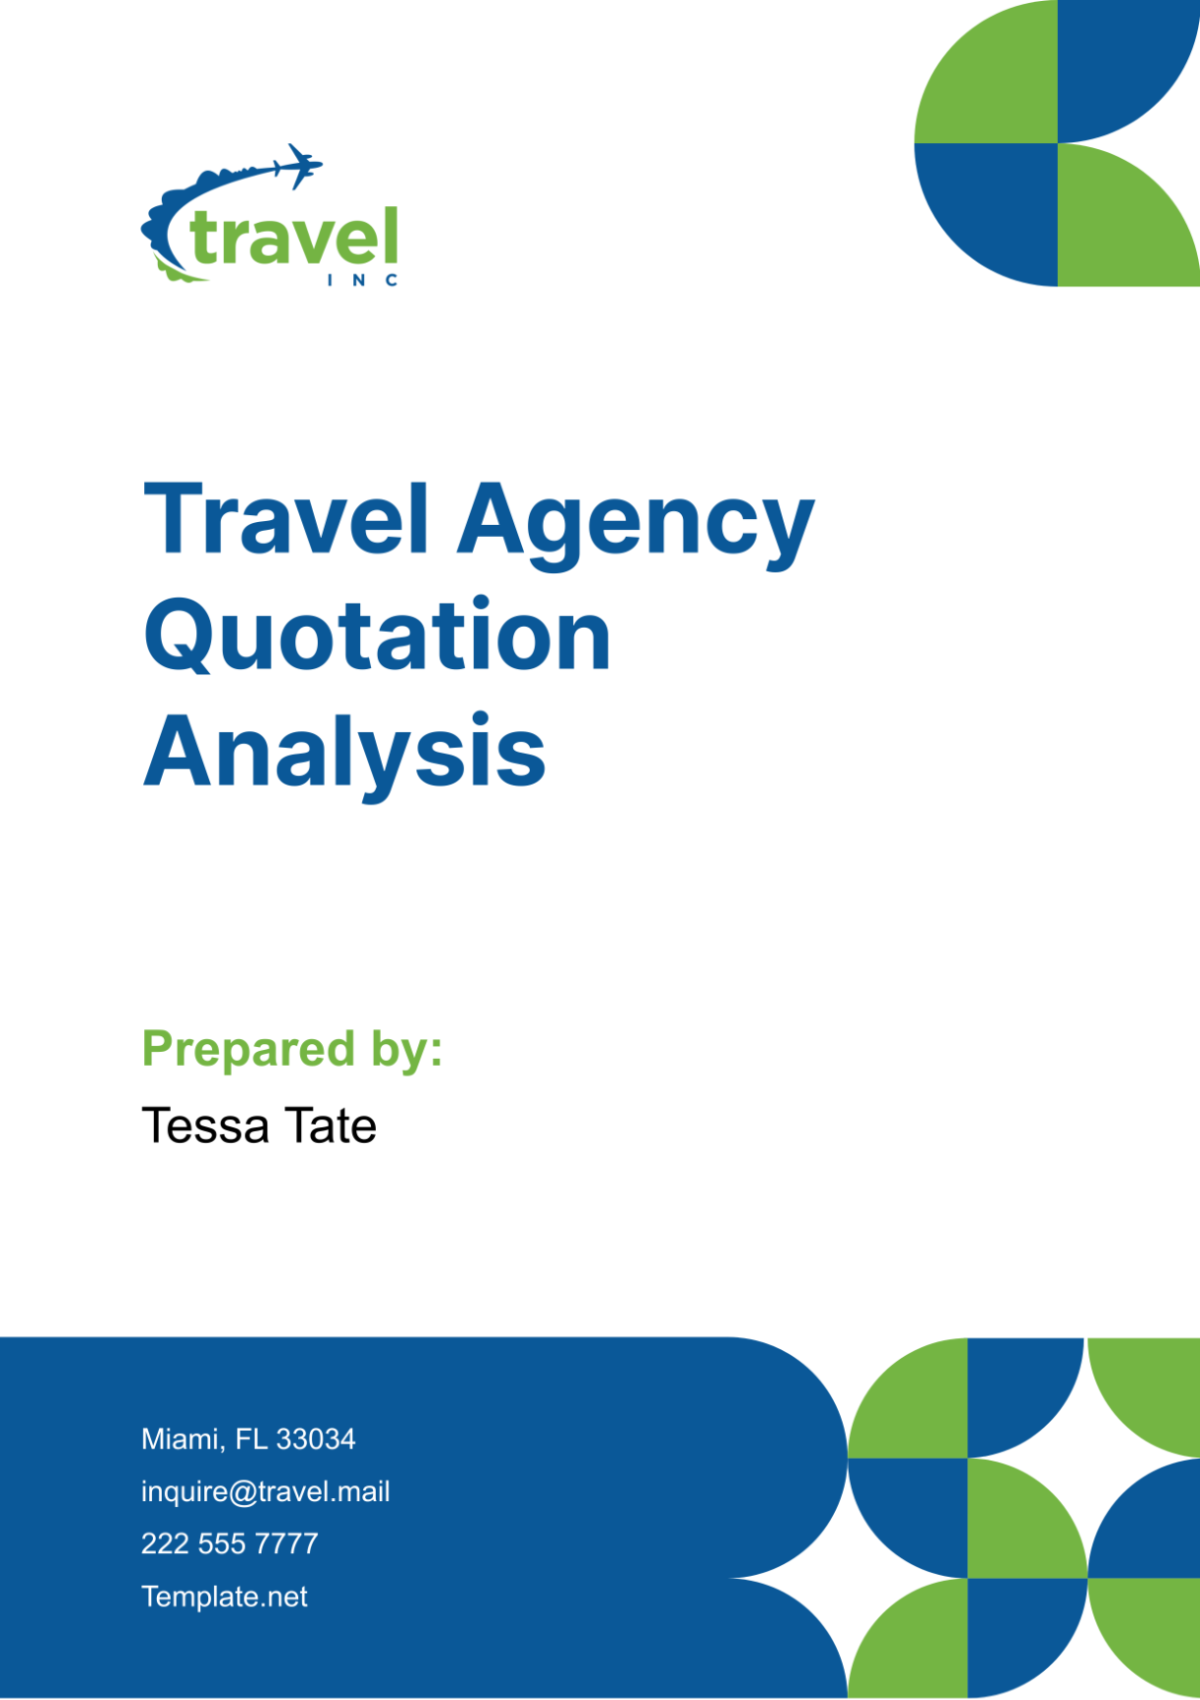 Travel Agency Quotation Analysis Template